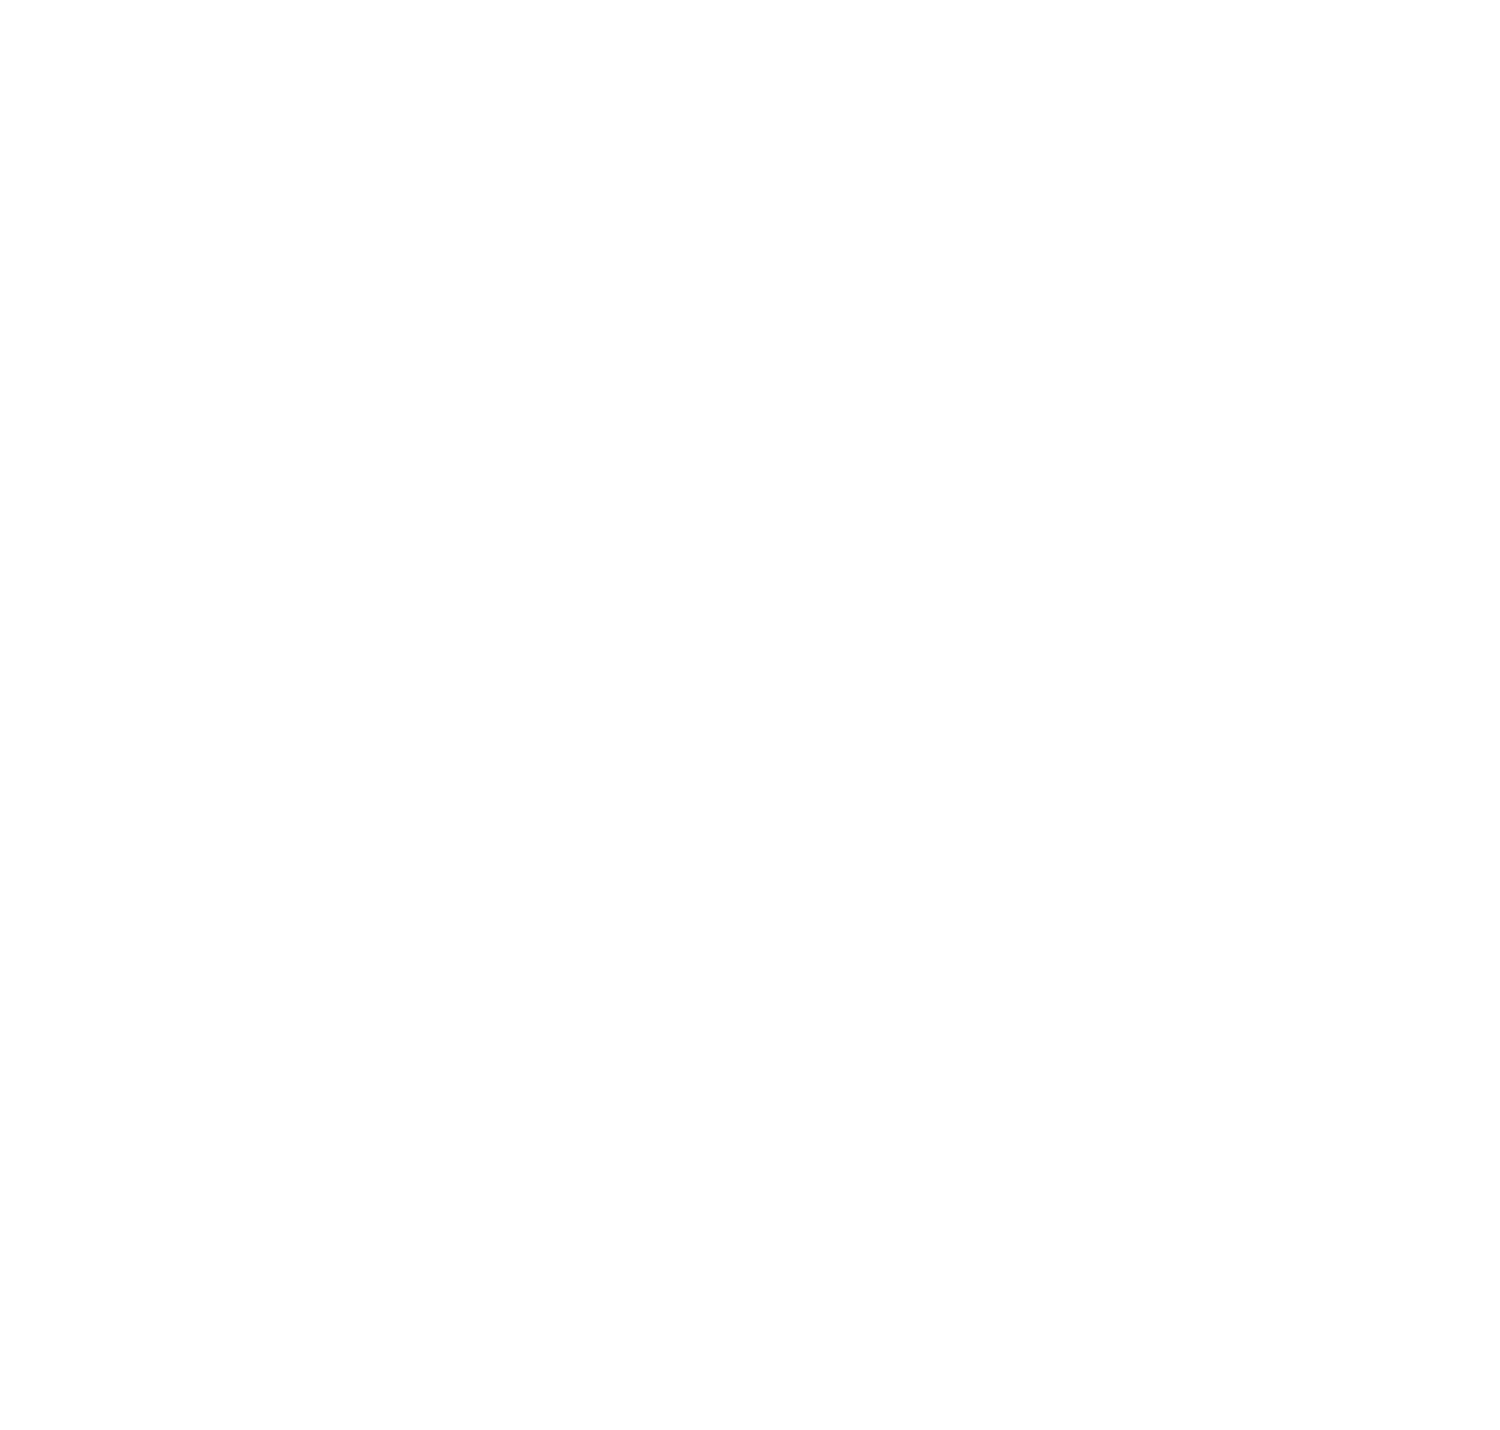 Our Words Collide